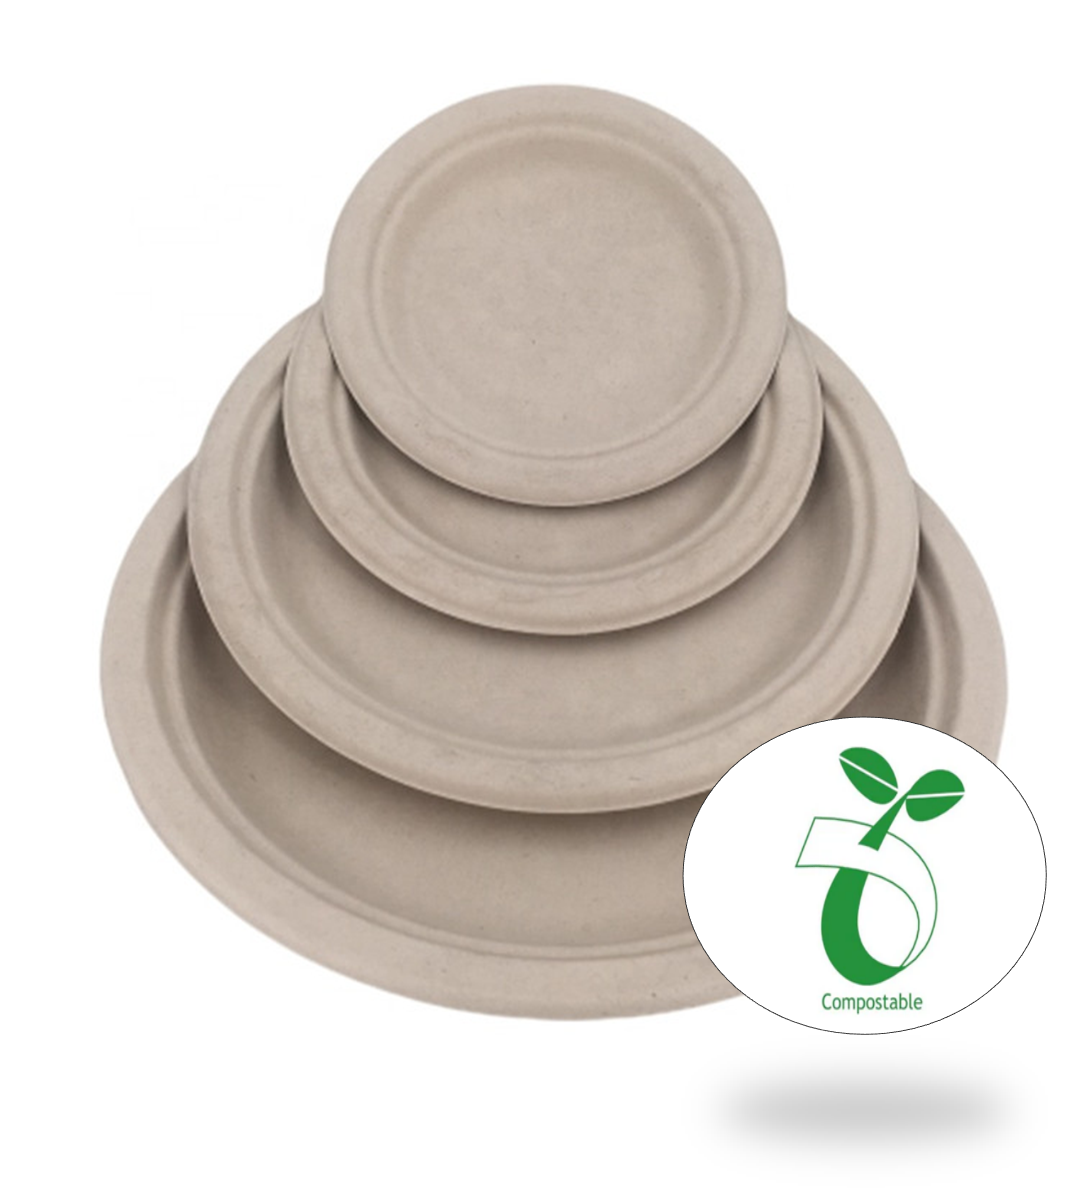 Reduce landfill with these premium biodegradable 7-inch Round Bagasse Molded Plates constructed with sugarcane fibers.